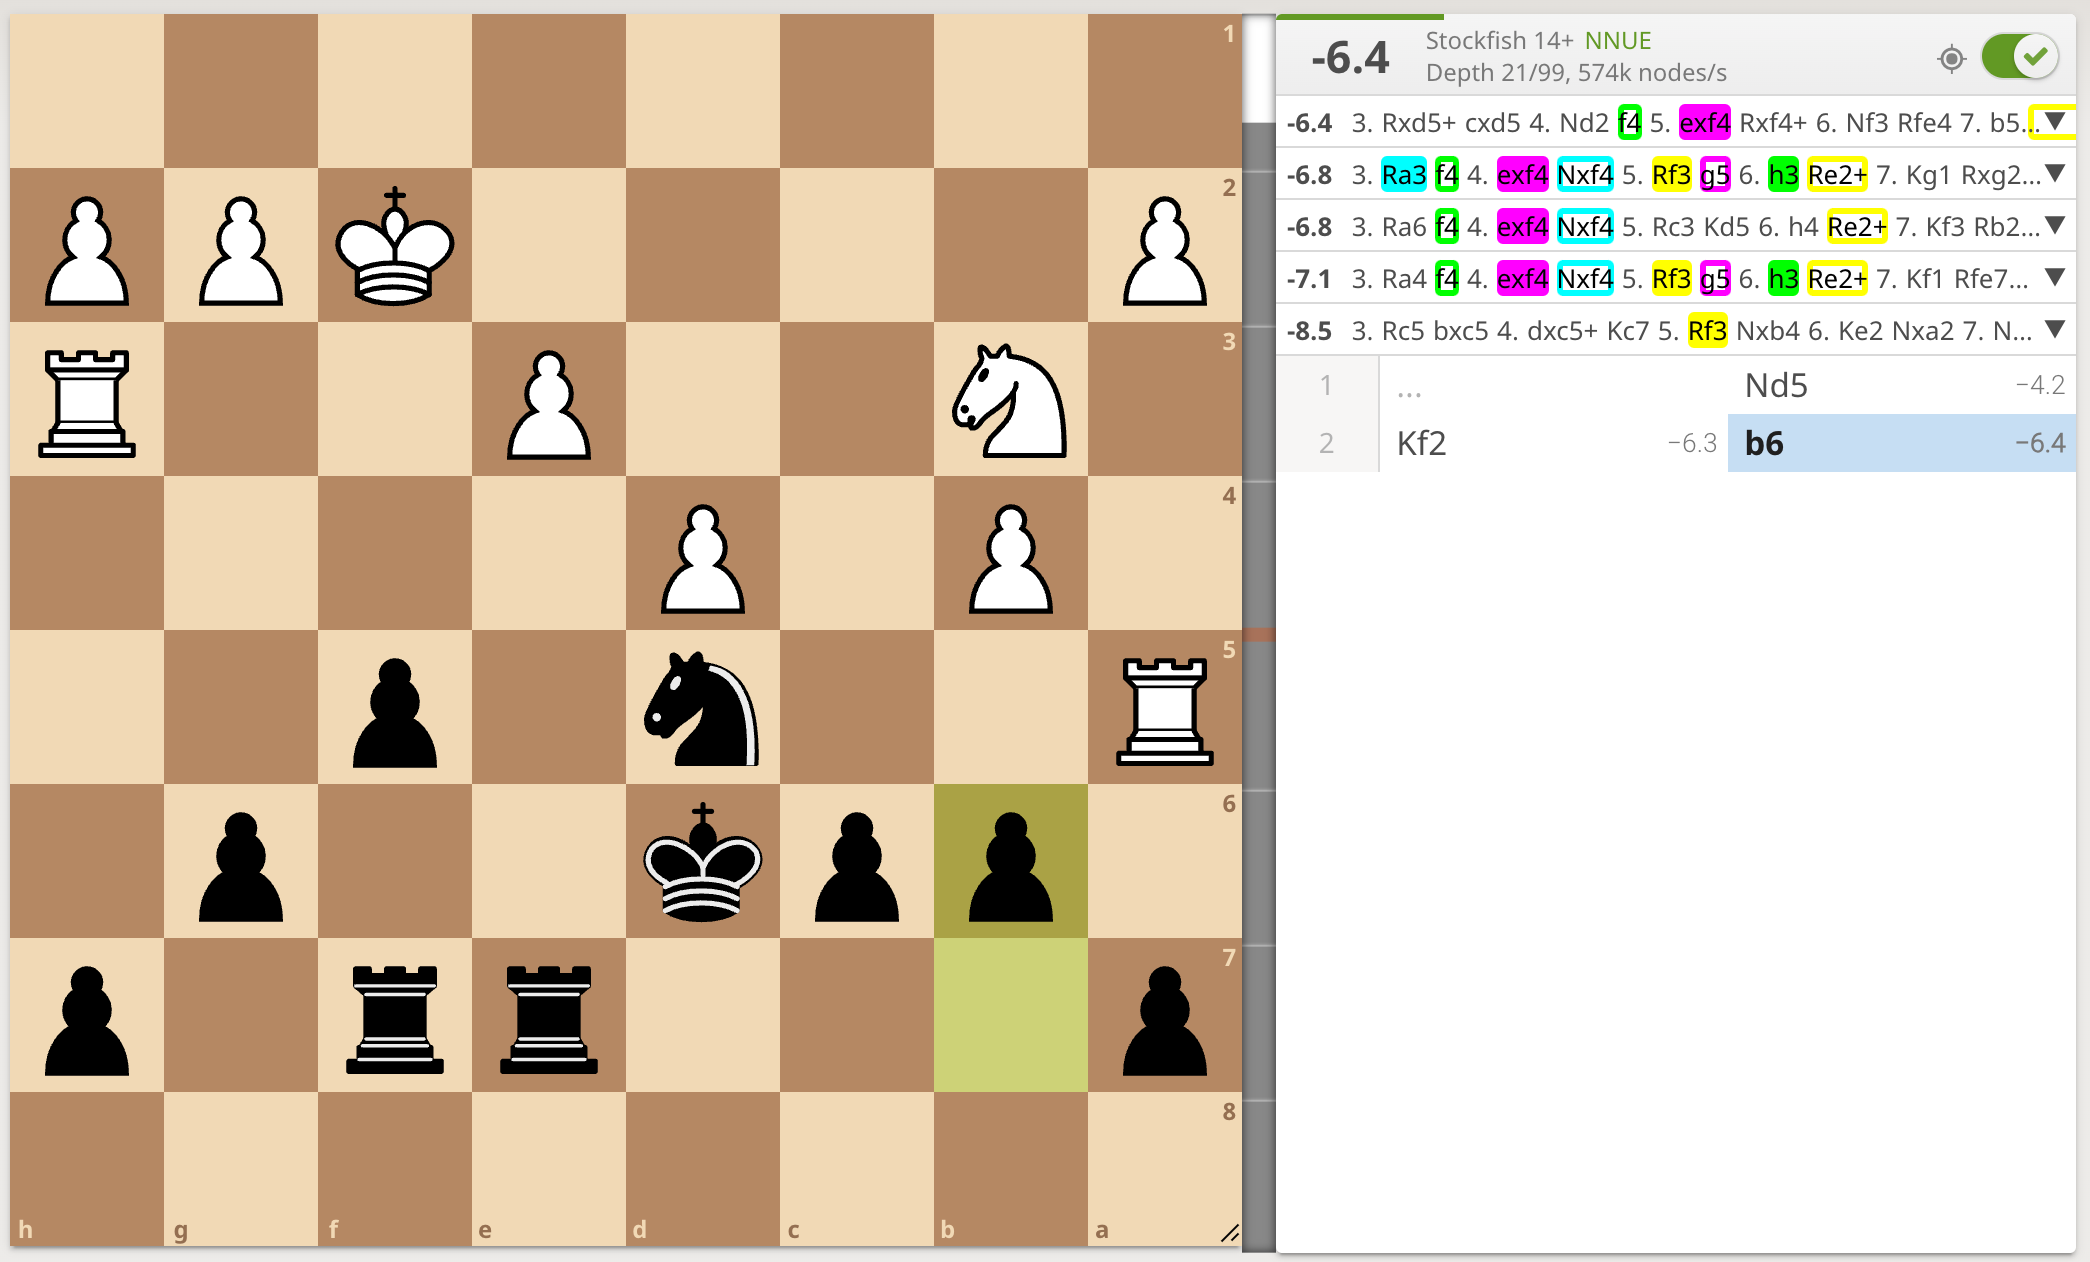 Displaying 's Analysis & Review screens LARGER using CSS  overriding and Stylus - Chess Forums 